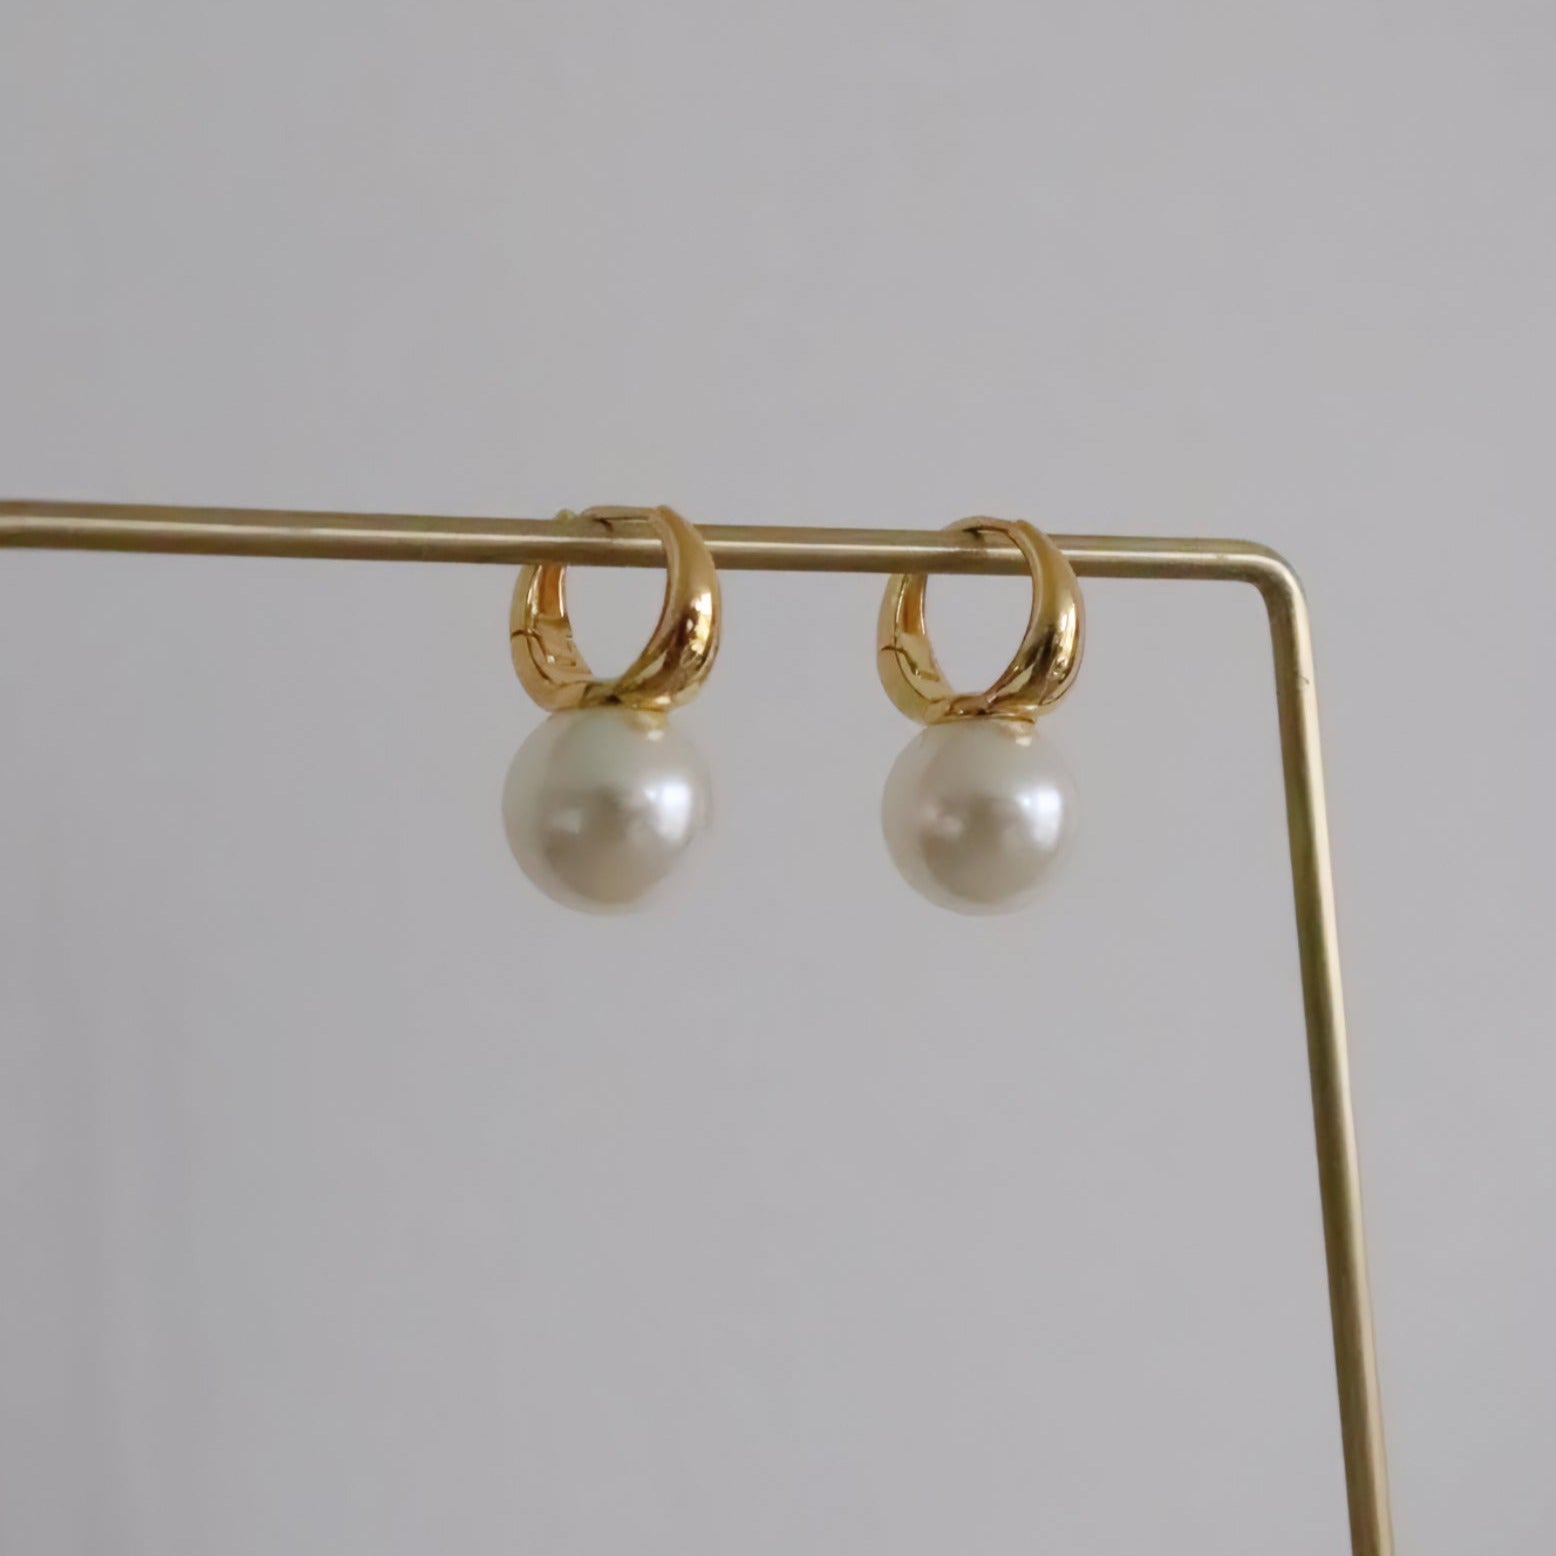 Thea hoops, Gold Plated Everyday Statement earrings with pearls